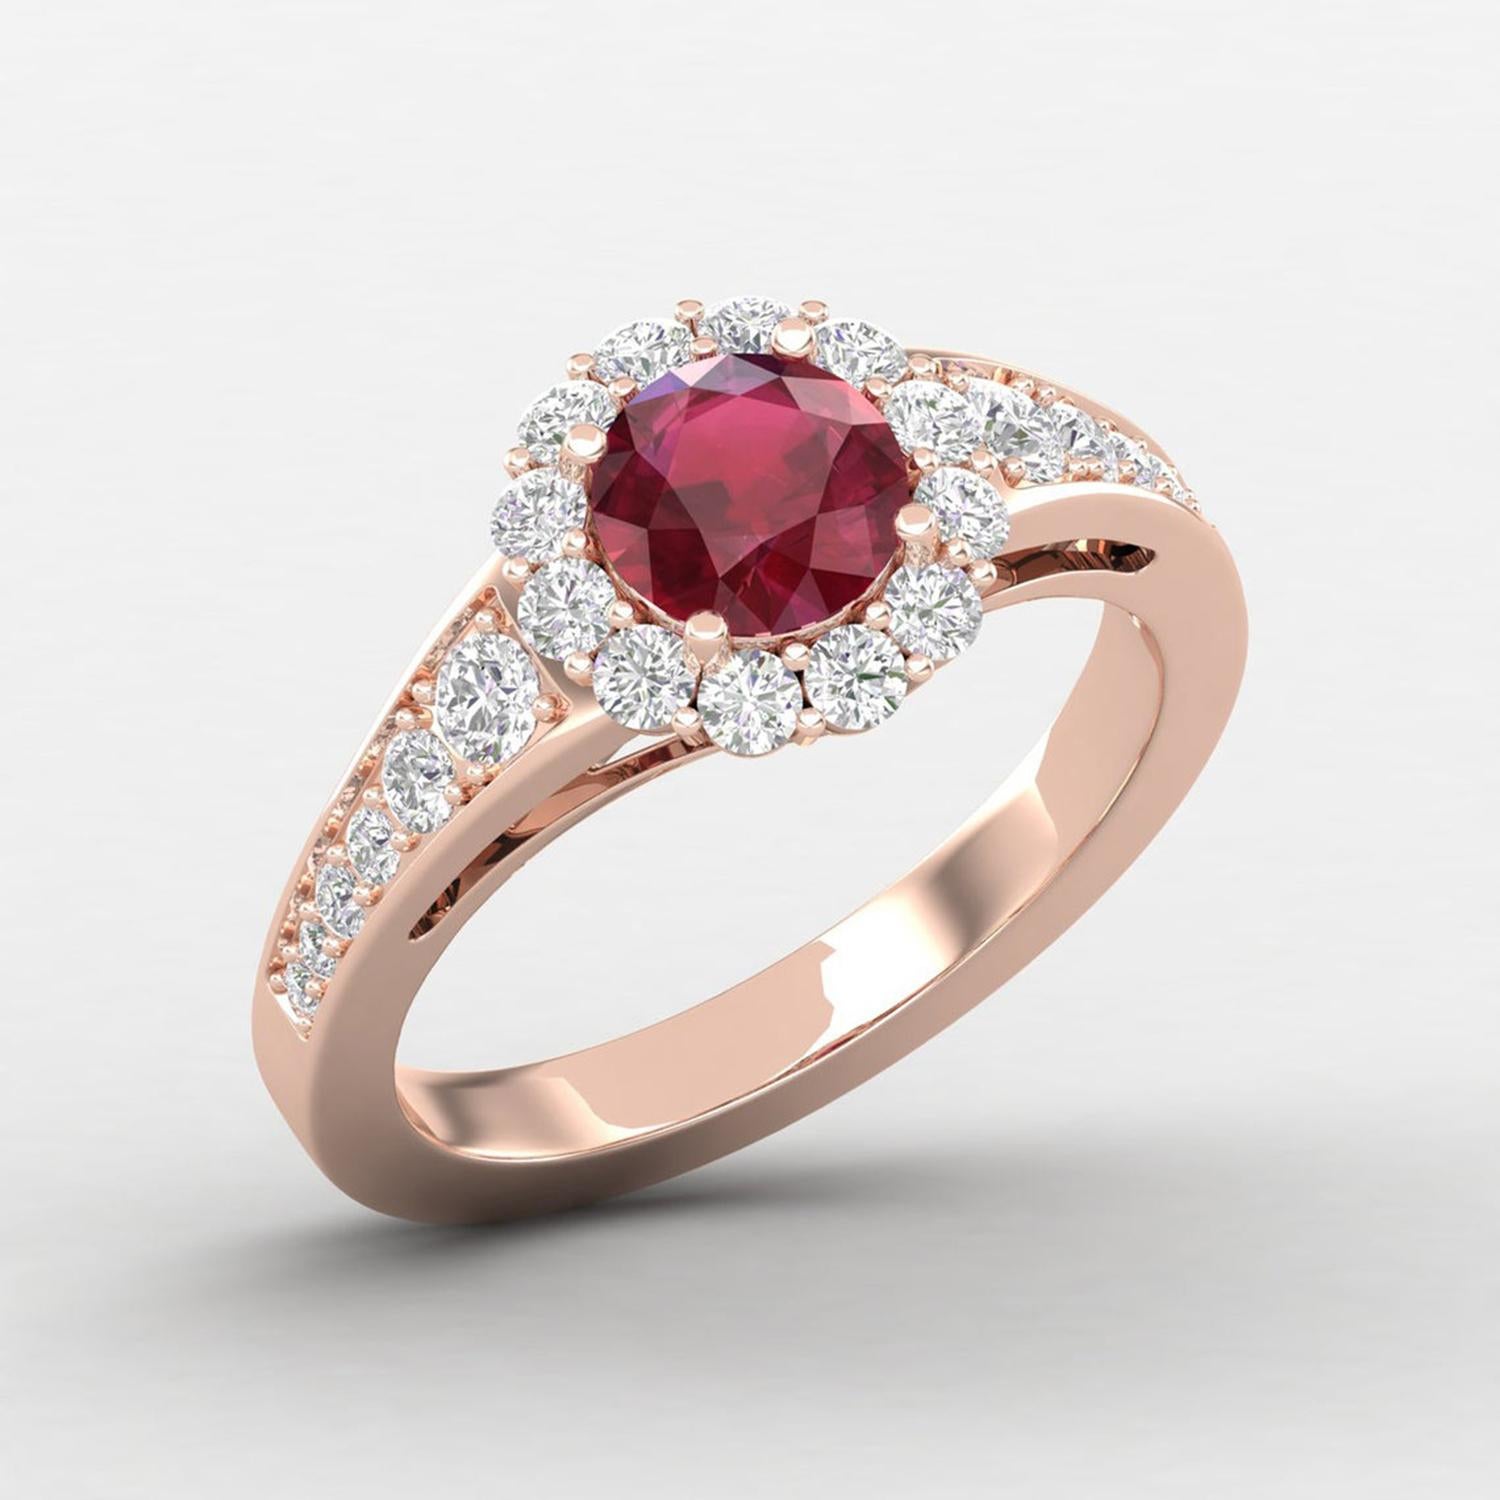 Round Cut 14 Karat Gold Ruby Ring / Round Diamond Ring / Solitaire Ring For Sale